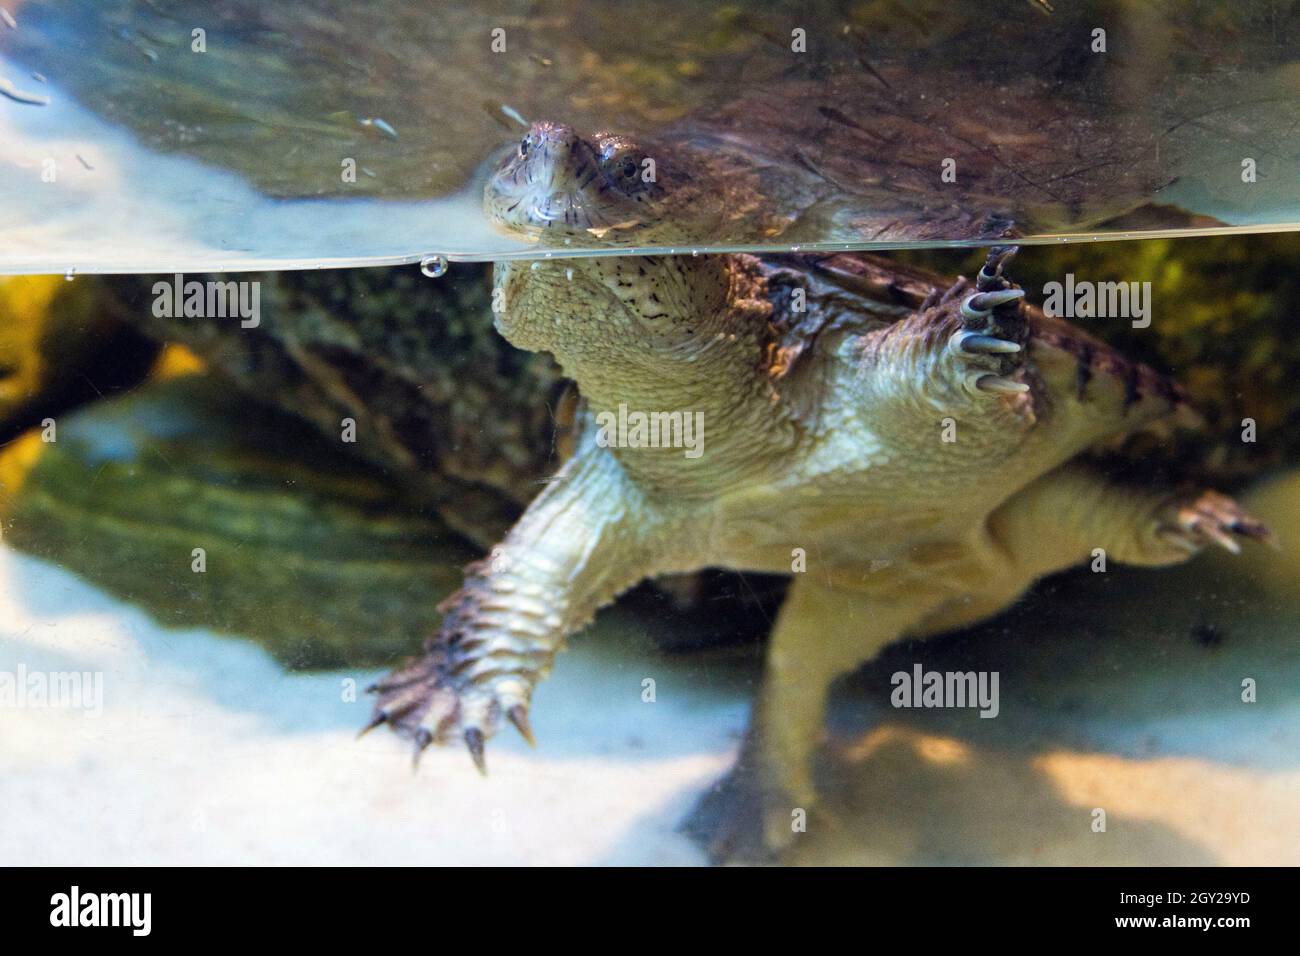 A dangerous, alert, curious and aggressive snapping turtle in a tank of water Stock Photo